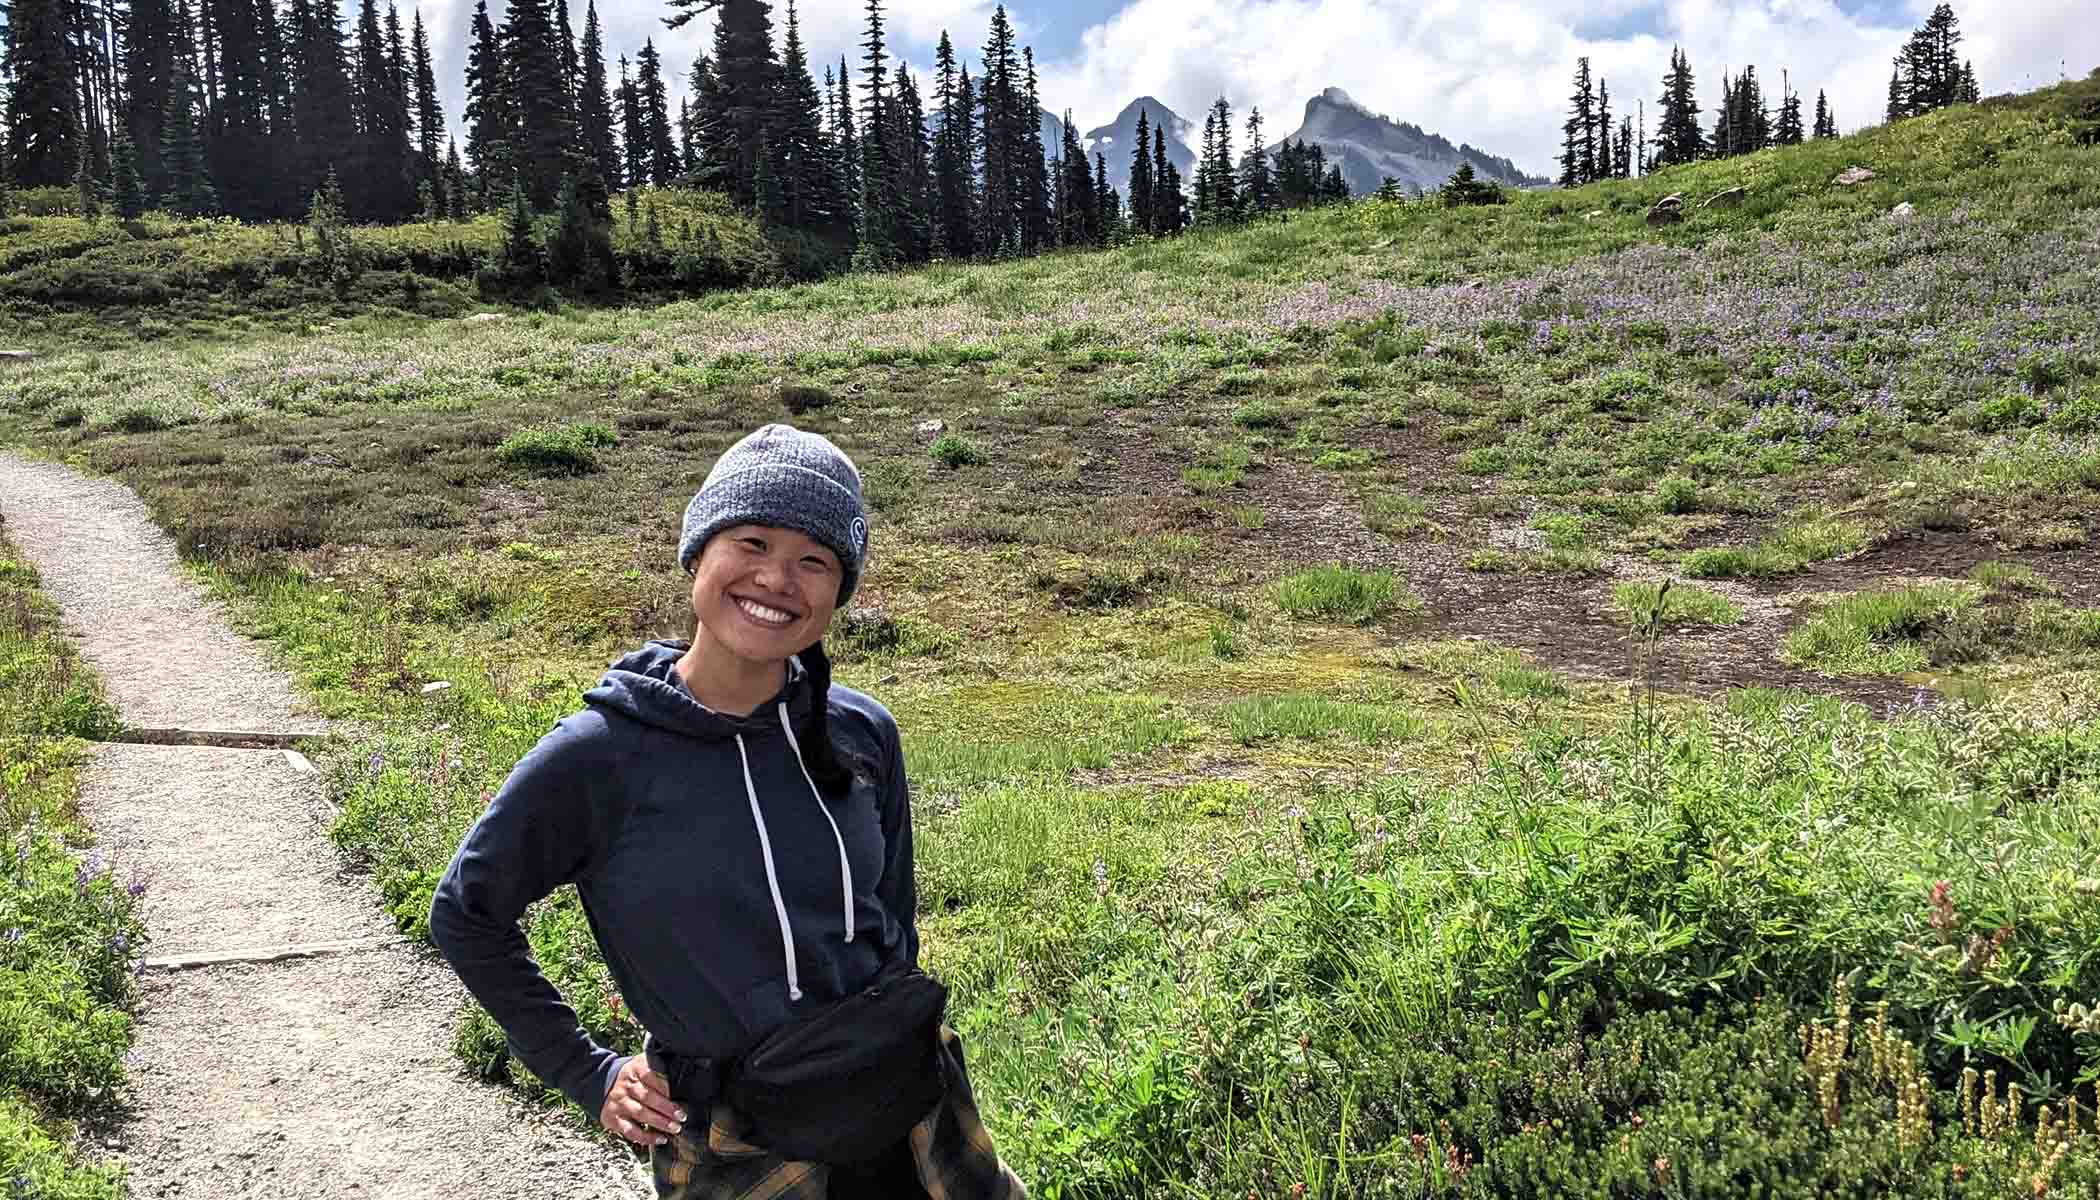 A woman smiles while on a hike. Greenery, trees and mountains are in the background.